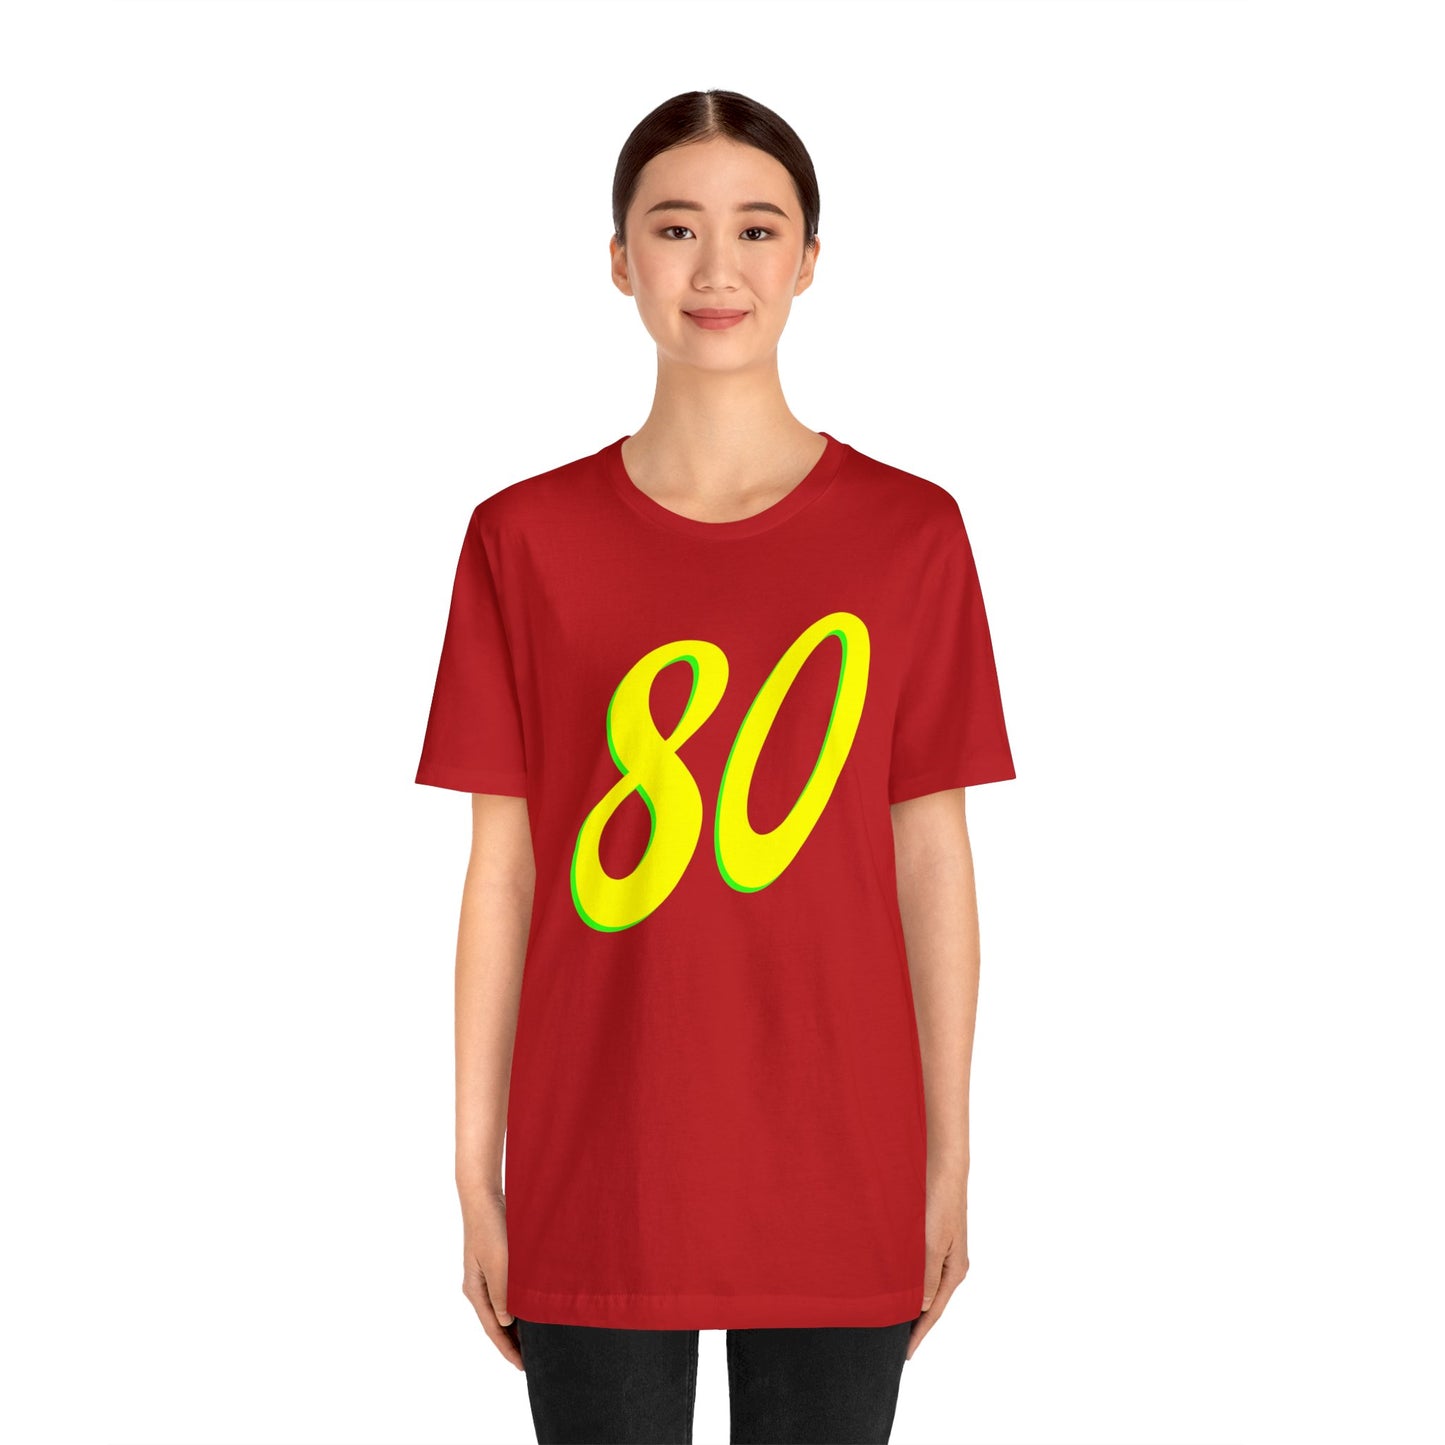 Number 80 Design - Soft Cotton Tee for birthdays and celebrations, Gift for friends and family, Multiple Options by clothezy.com in Dark Grey Heather Size Medium - Buy Now